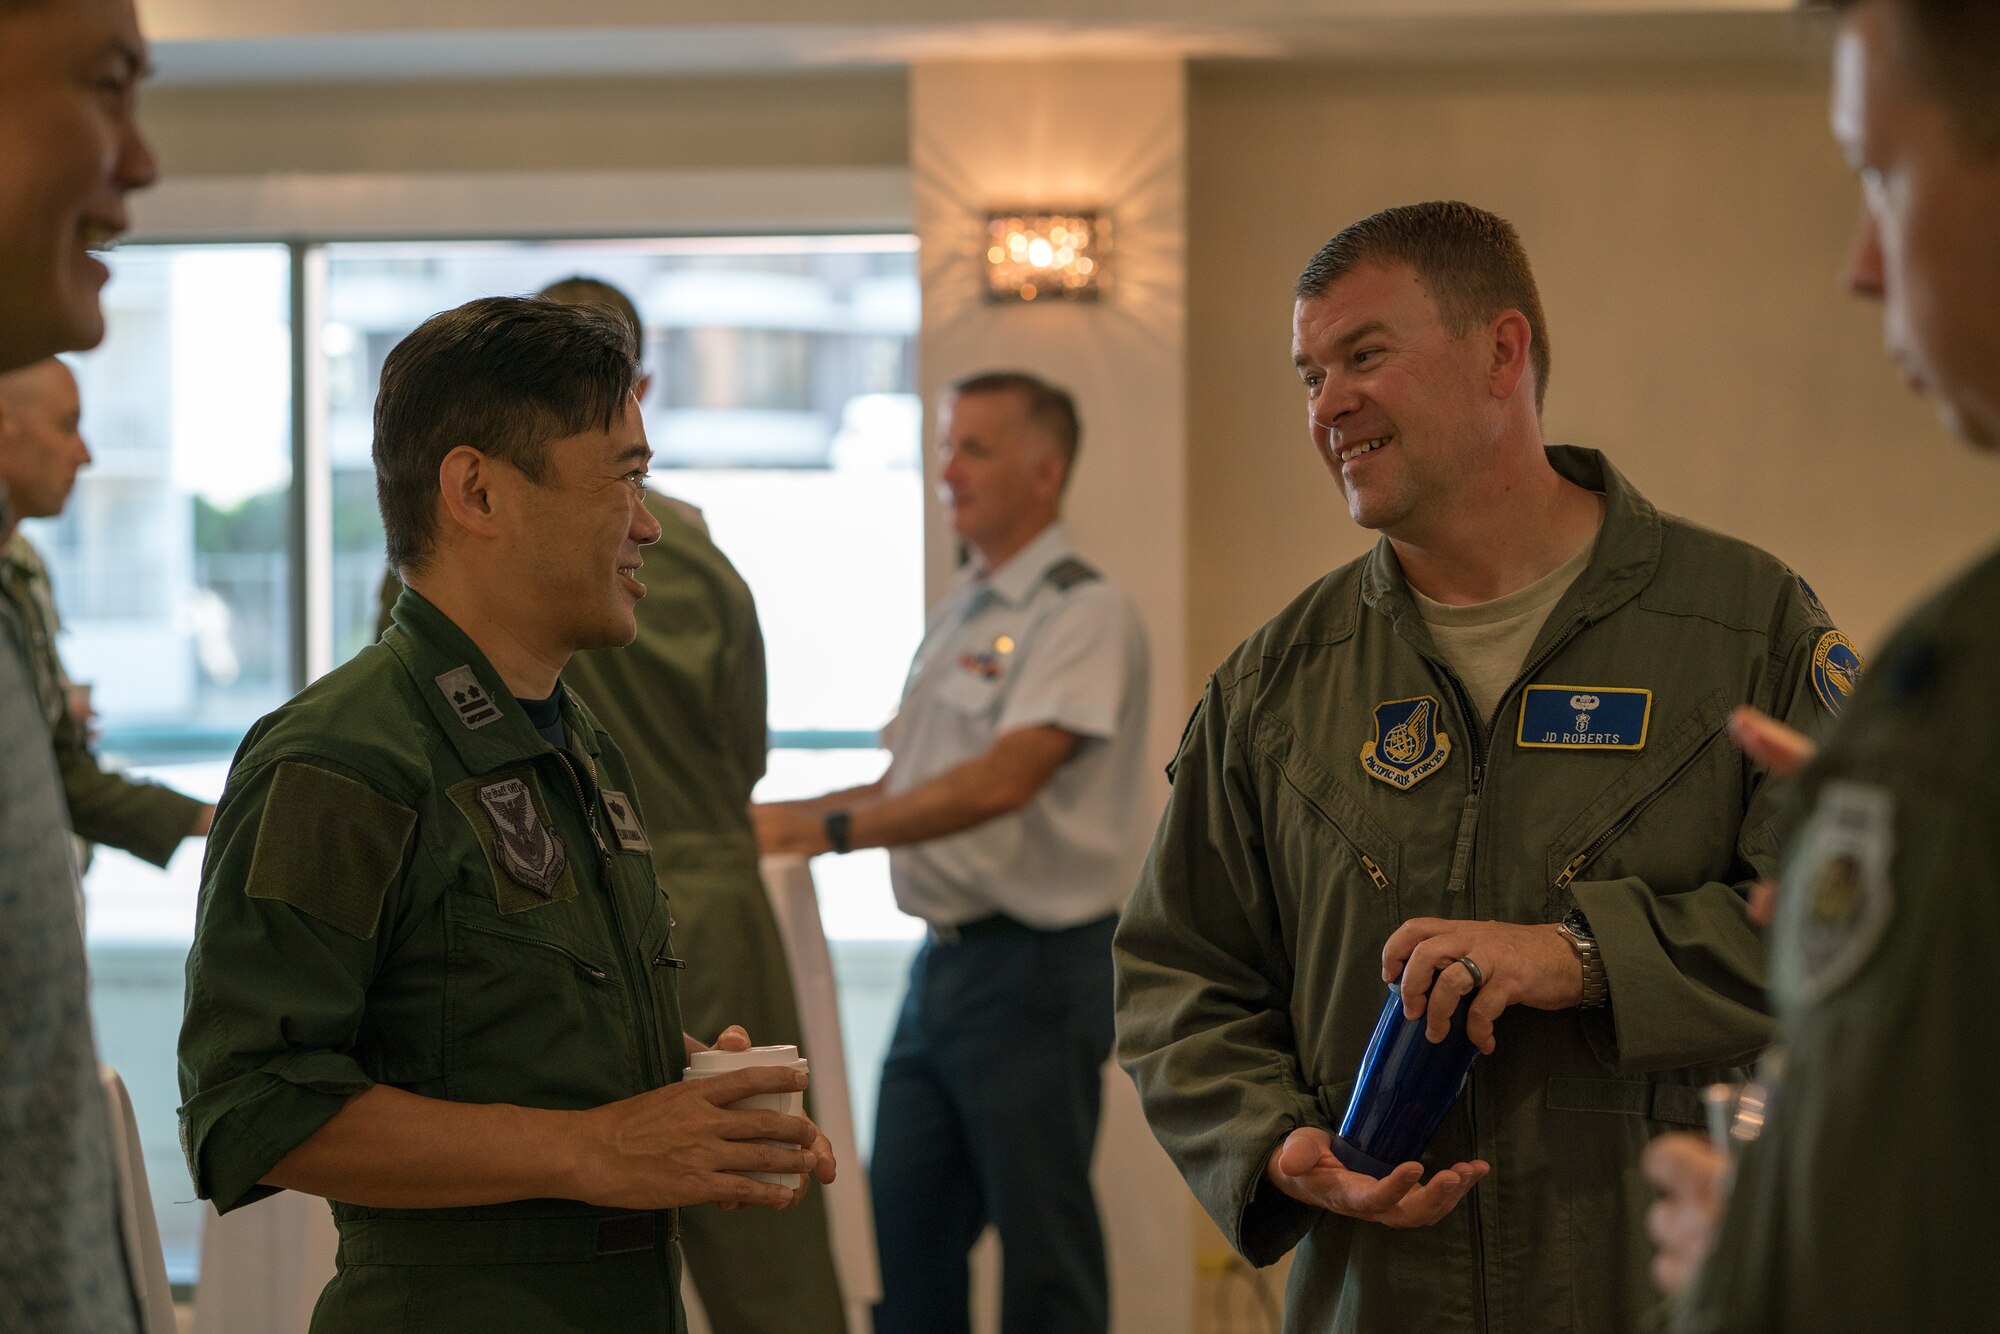 Koku Jieitai (Japan Air Self-Defense Force) Lt. Col. Ryouhei Nakashima (left) and U.S. Air Force Lt. Col. Daniel Roberts, Chief Aviation Management Branch, PACAF Human Factors (right) socialize during the Asia-Pacific Aviation Safety Subject Matter Expert Exchange (APASS) in Honolulu, Hawaii, Aug. 14, 2018. APASS allows partner nations in the Indo-Pacific to discuss aviation safety practices and devise  solutions to challenges faced by the various air forces. (U.S. Air Force photo by Staff Sgt. Daniel Robles)